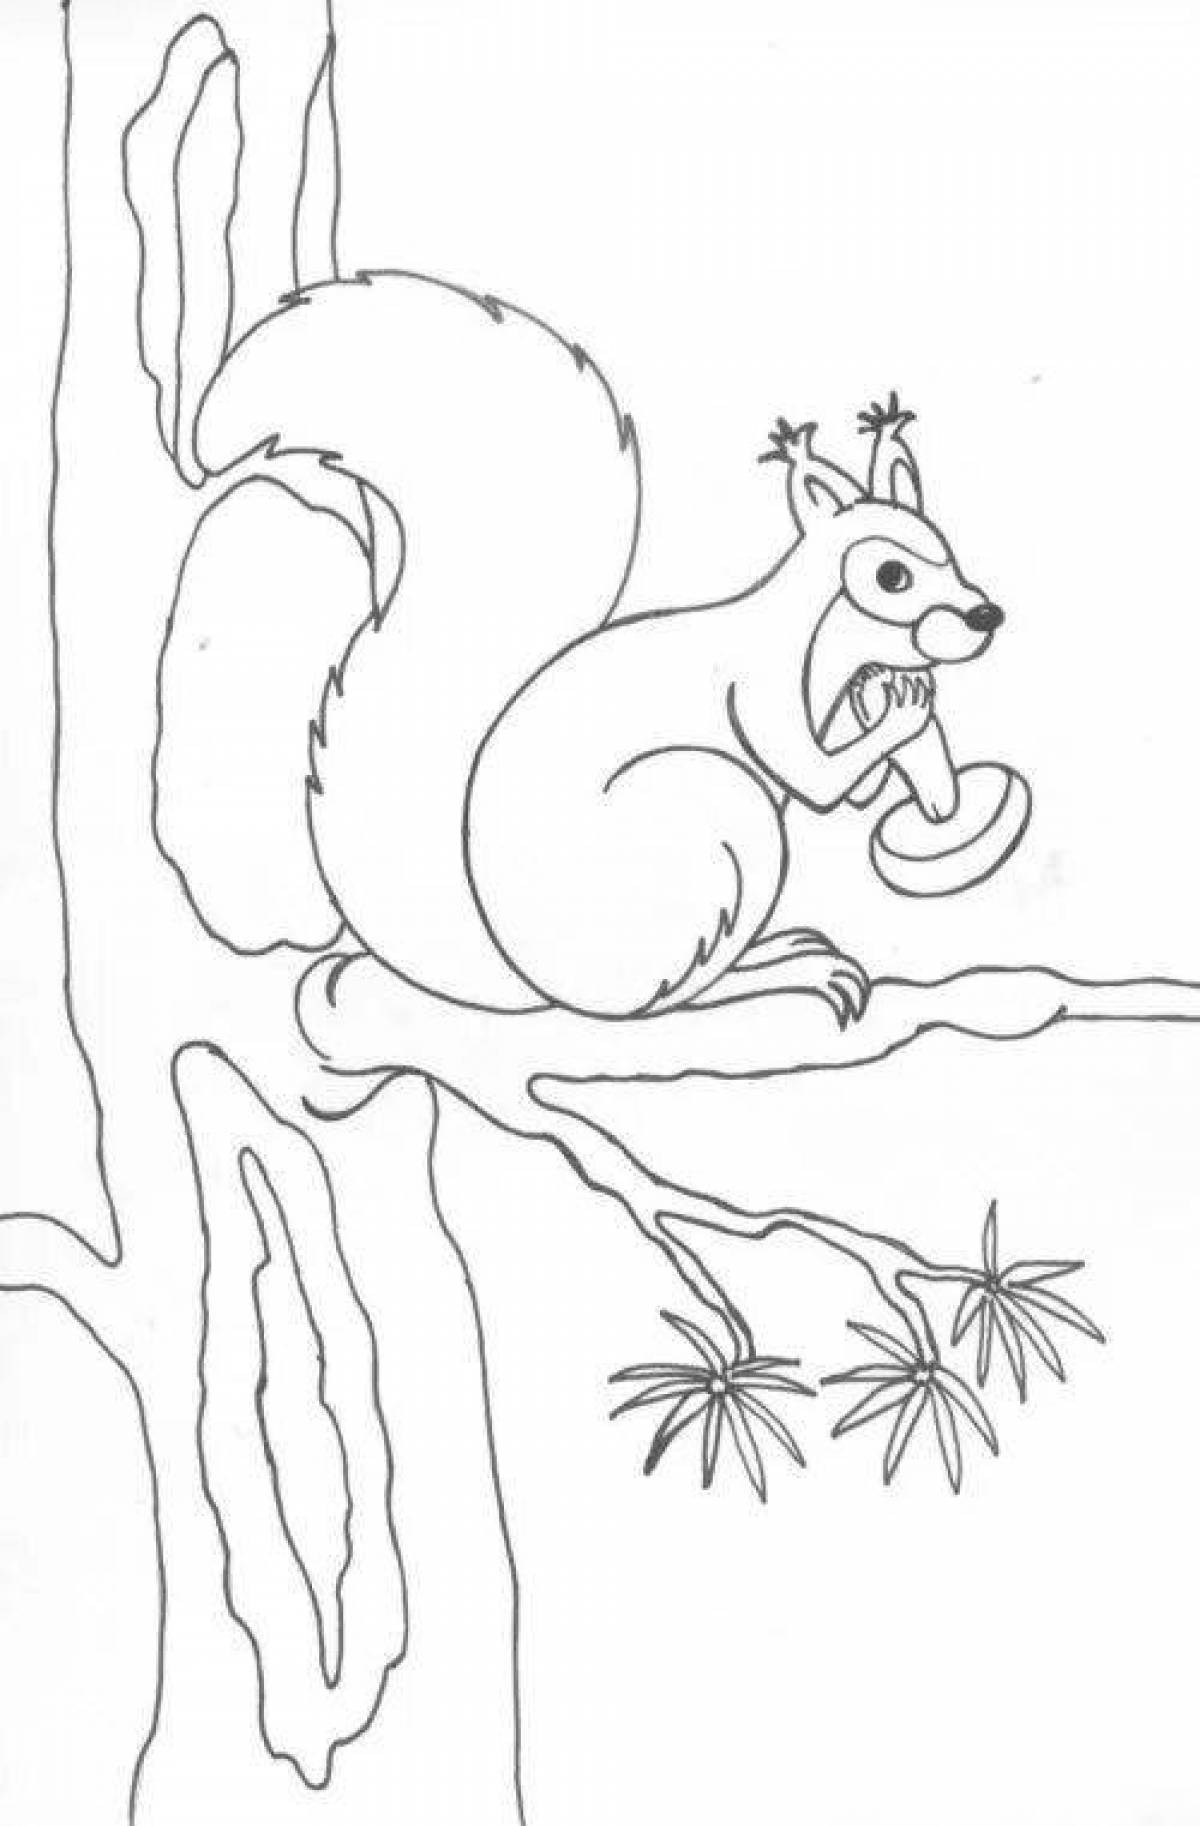 Coloring book with bubble squirrel